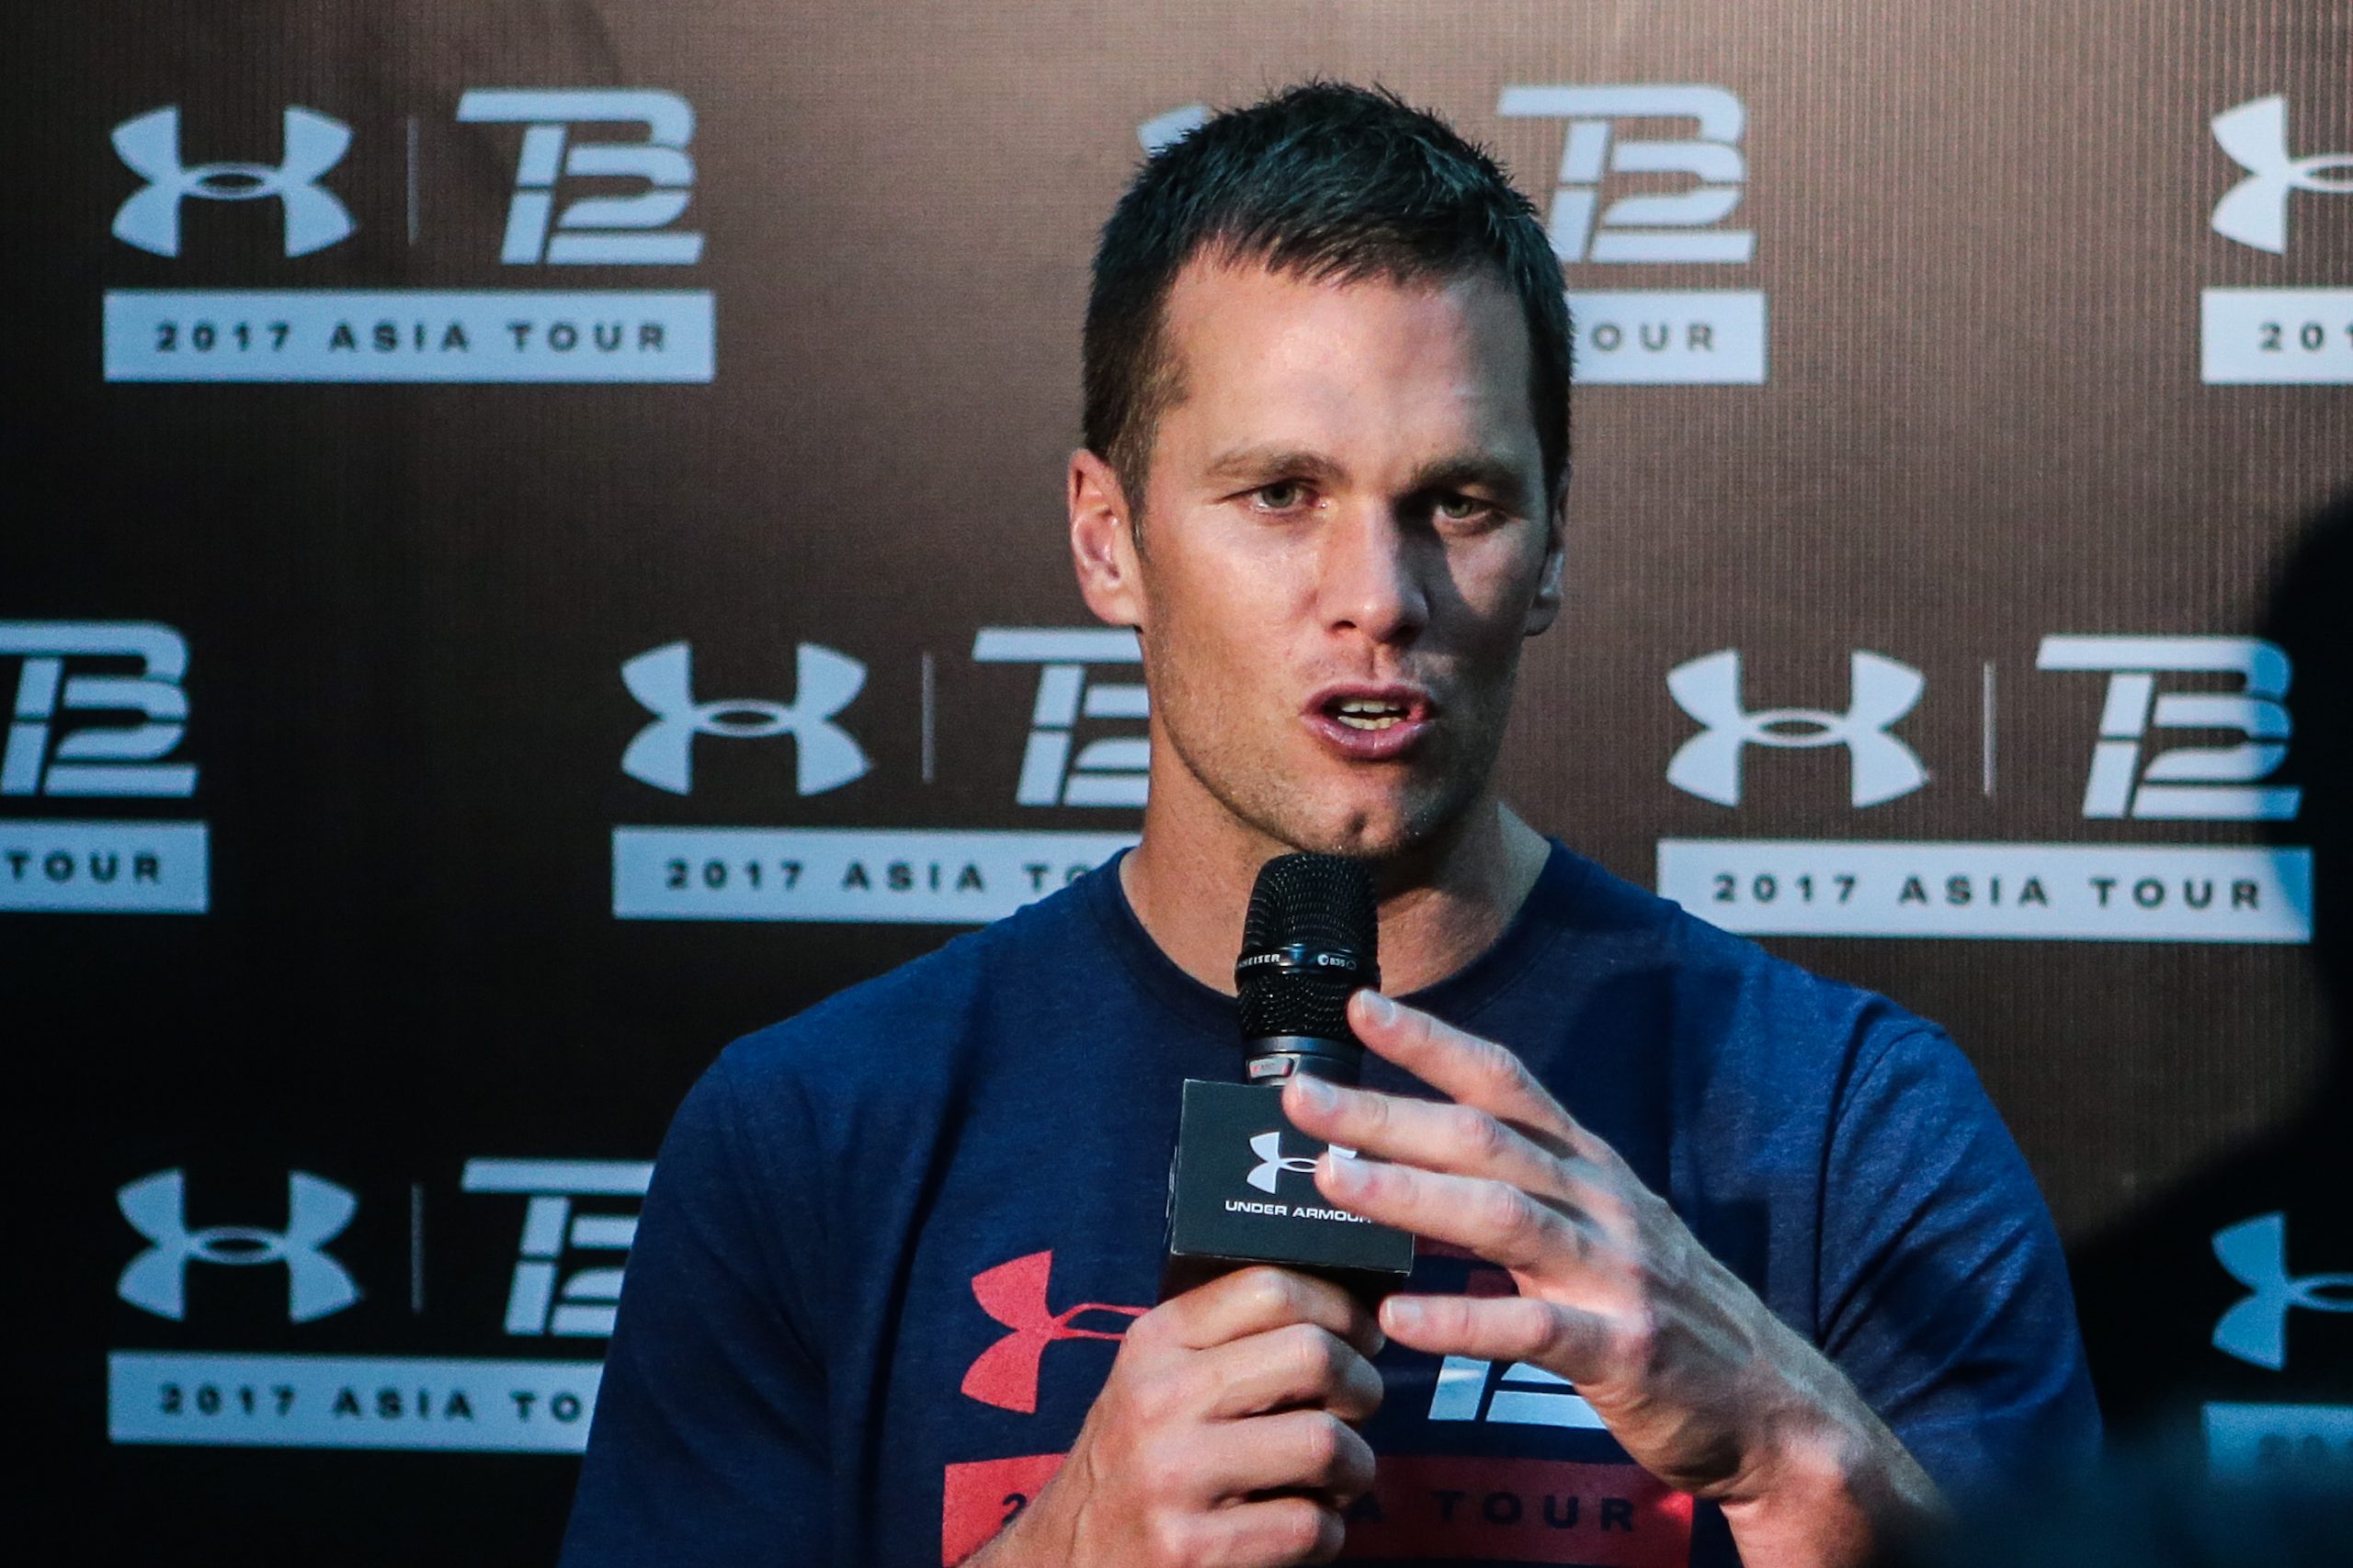 American football player Tom Brady for the New England Patriots of the National Football League (NFL) speaks during a football training camp in Shanghai, China, 20 June 2017.